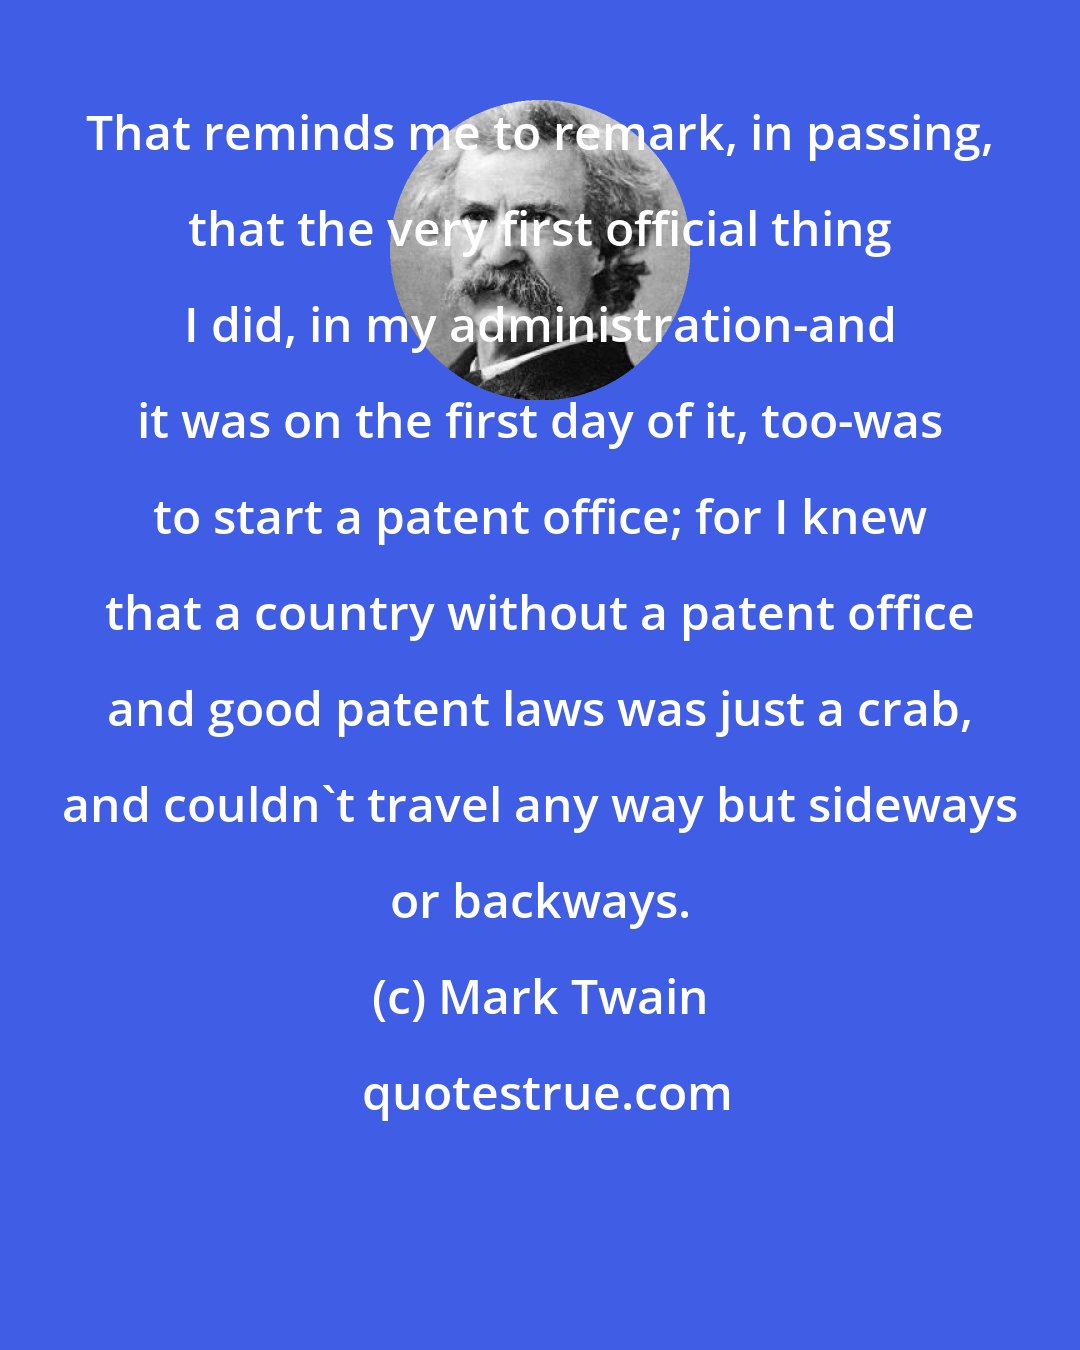 Mark Twain: That reminds me to remark, in passing, that the very first official thing I did, in my administration-and it was on the first day of it, too-was to start a patent office; for I knew that a country without a patent office and good patent laws was just a crab, and couldn't travel any way but sideways or backways.